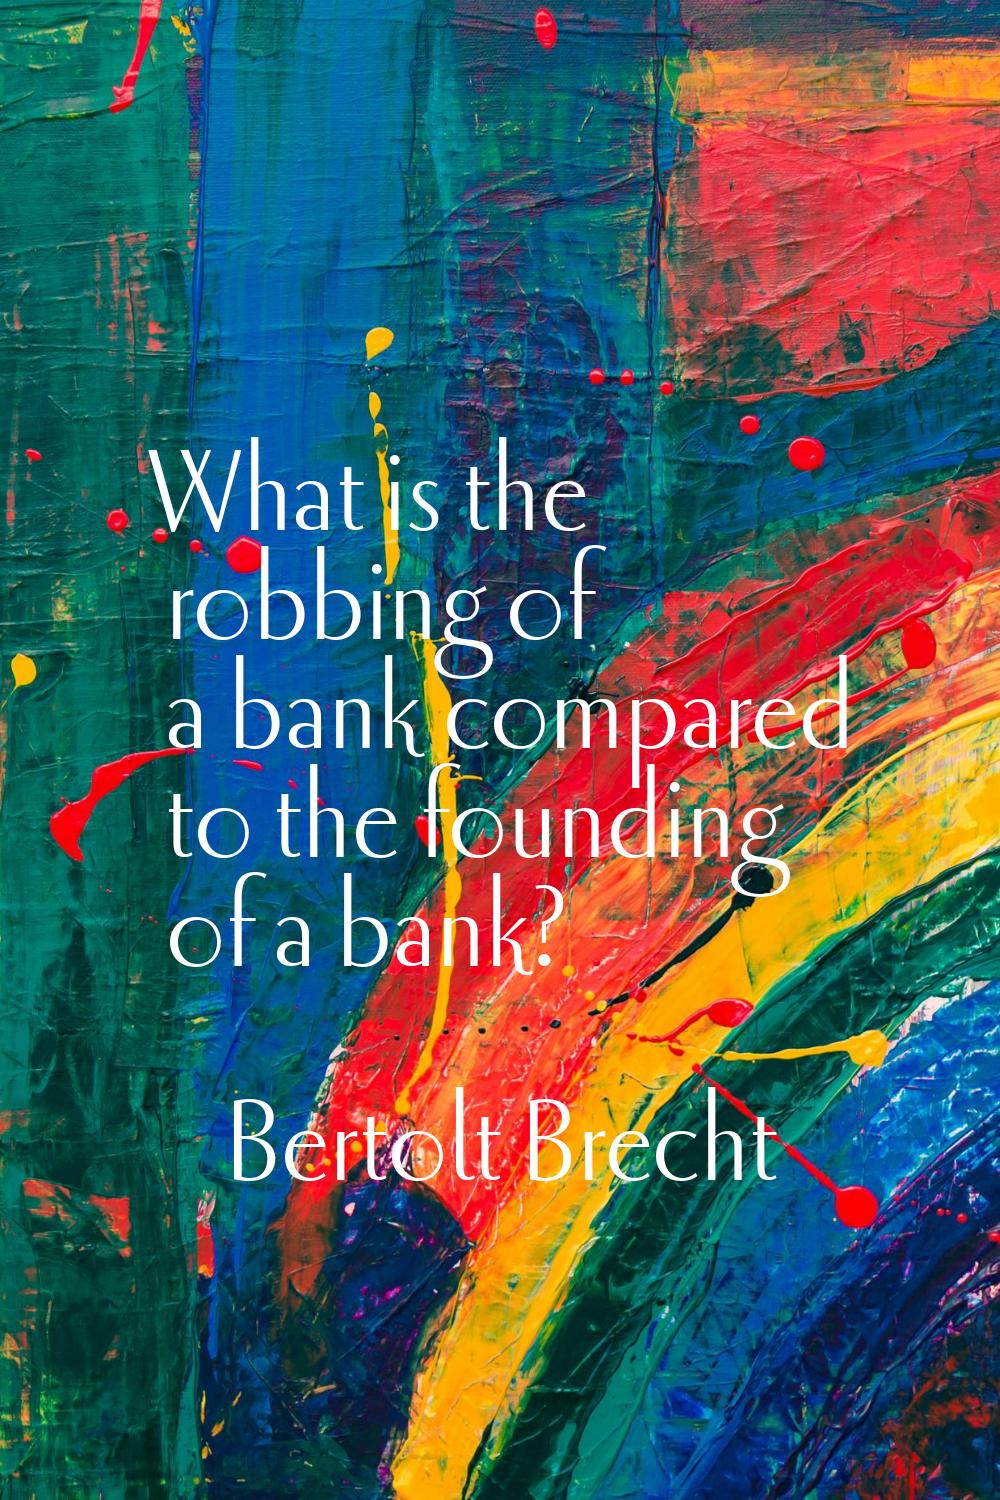 What is the robbing of a bank compared to the founding of a bank?